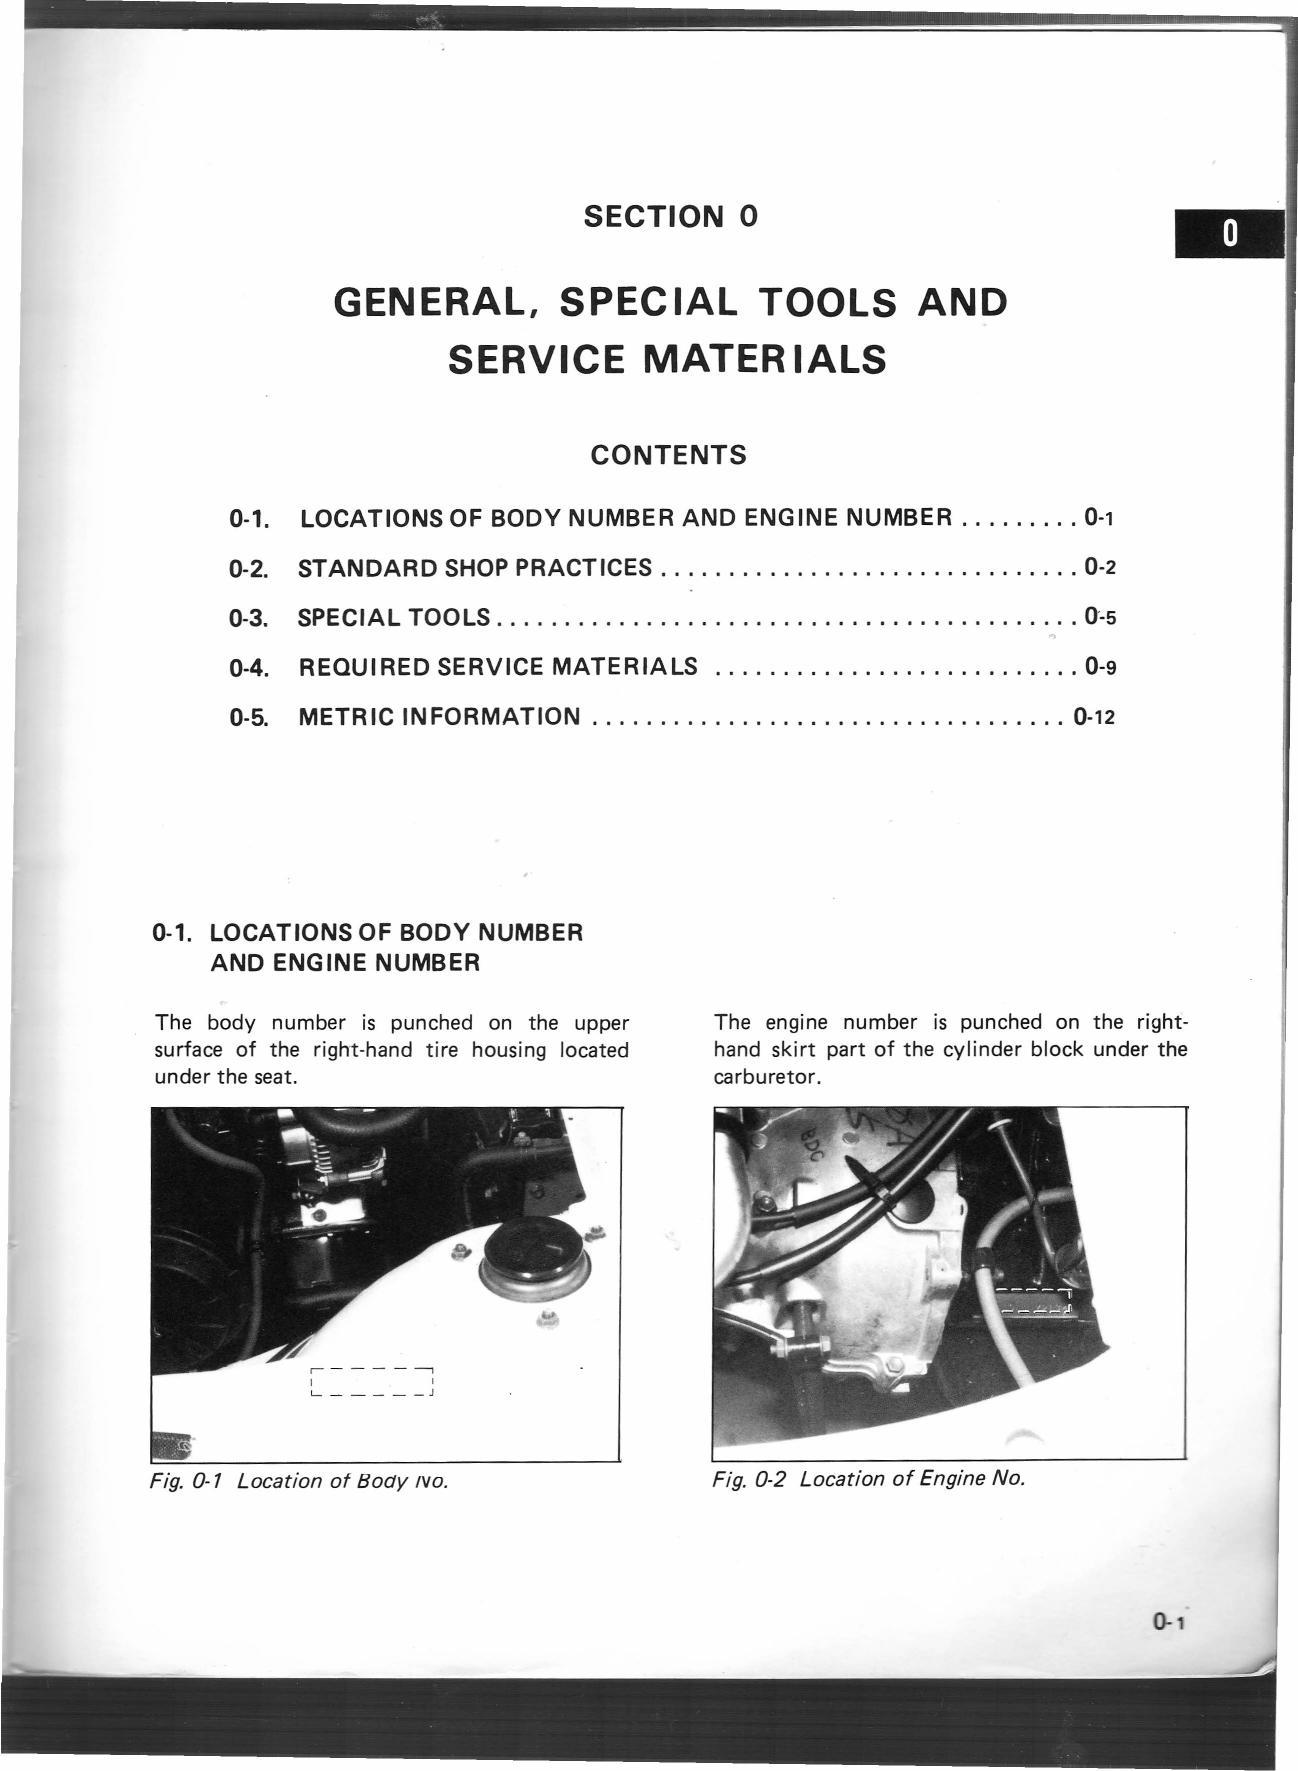 1985-1991 Suzuki Carry manual Preview image 2